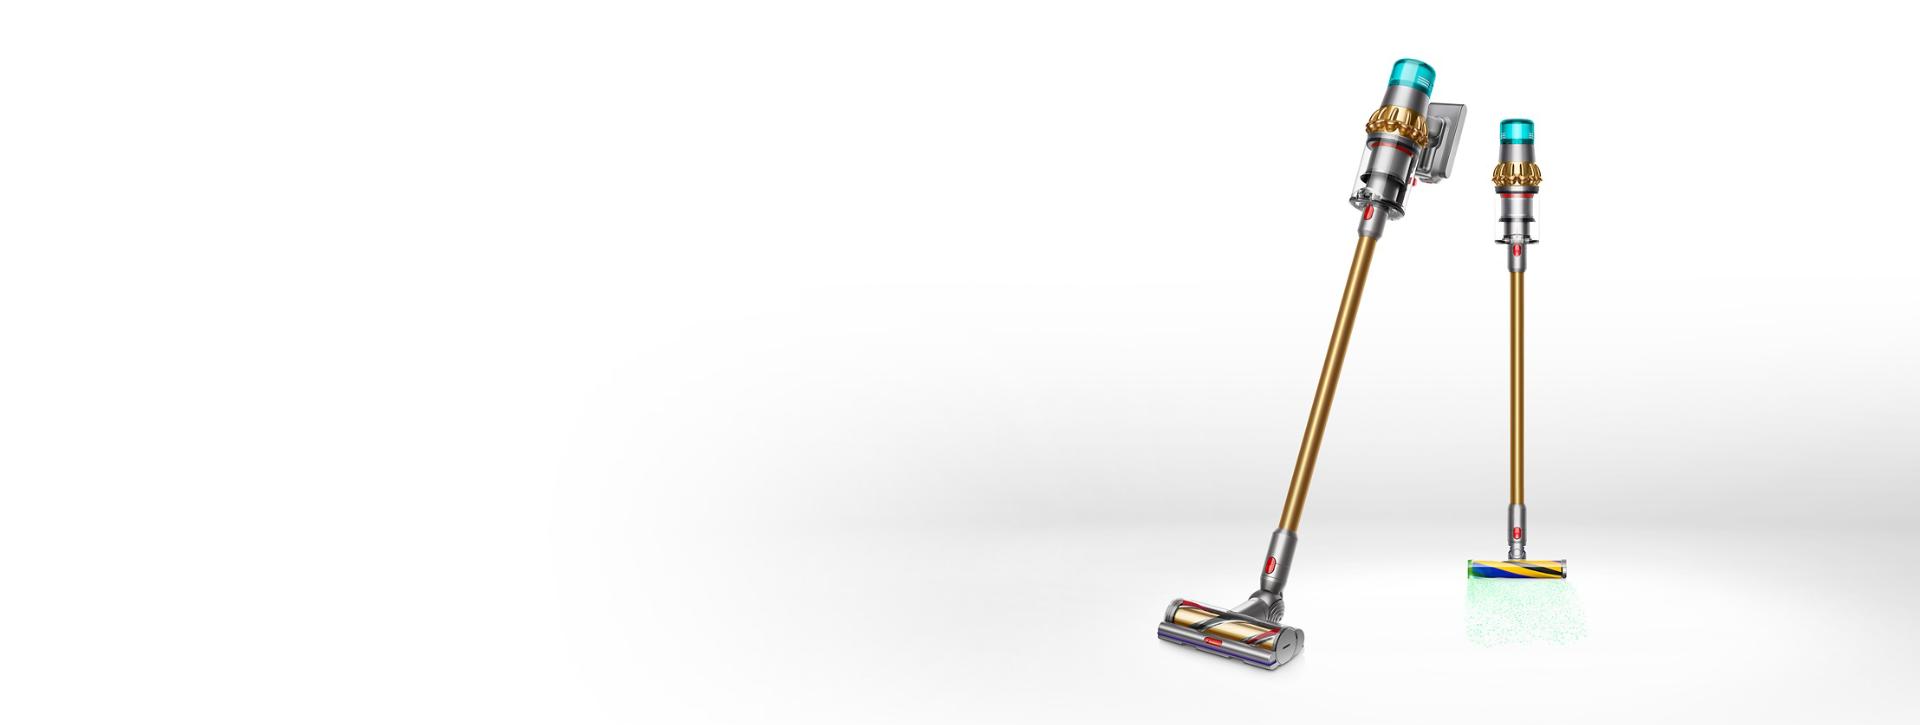 The Dyson V15 Detect vacuum cleaner